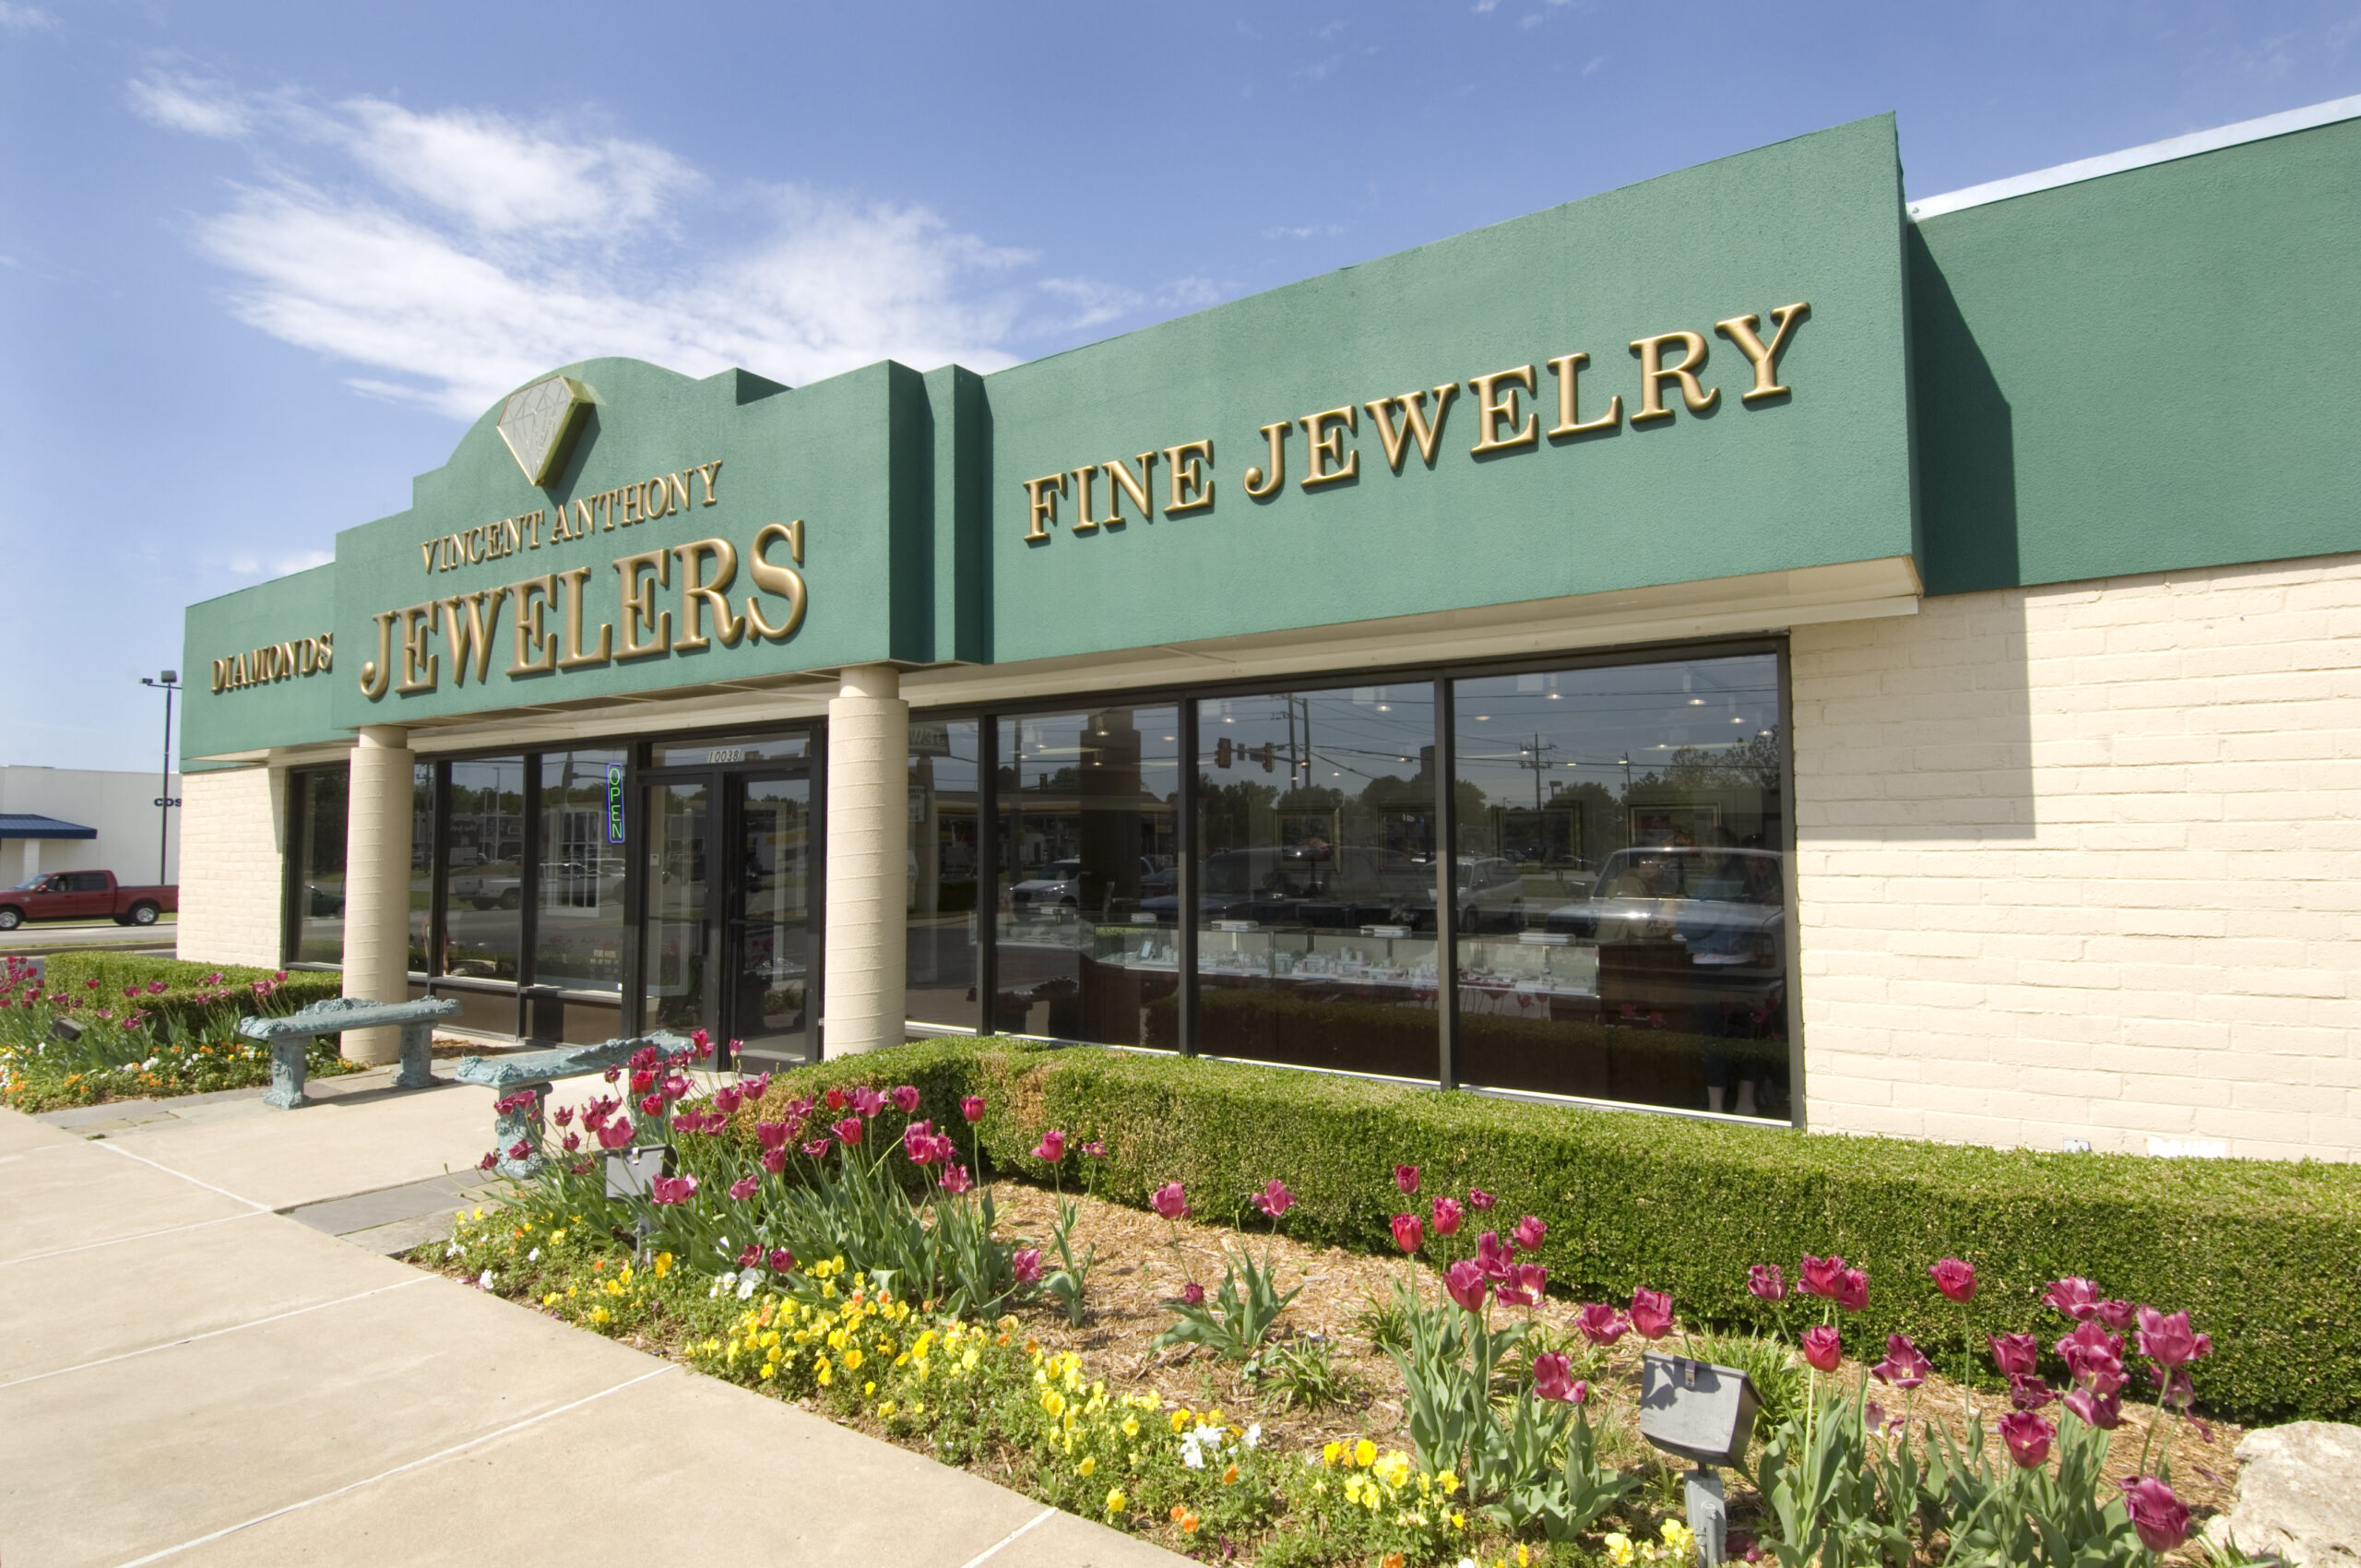 Vincent Anthony Jewelers